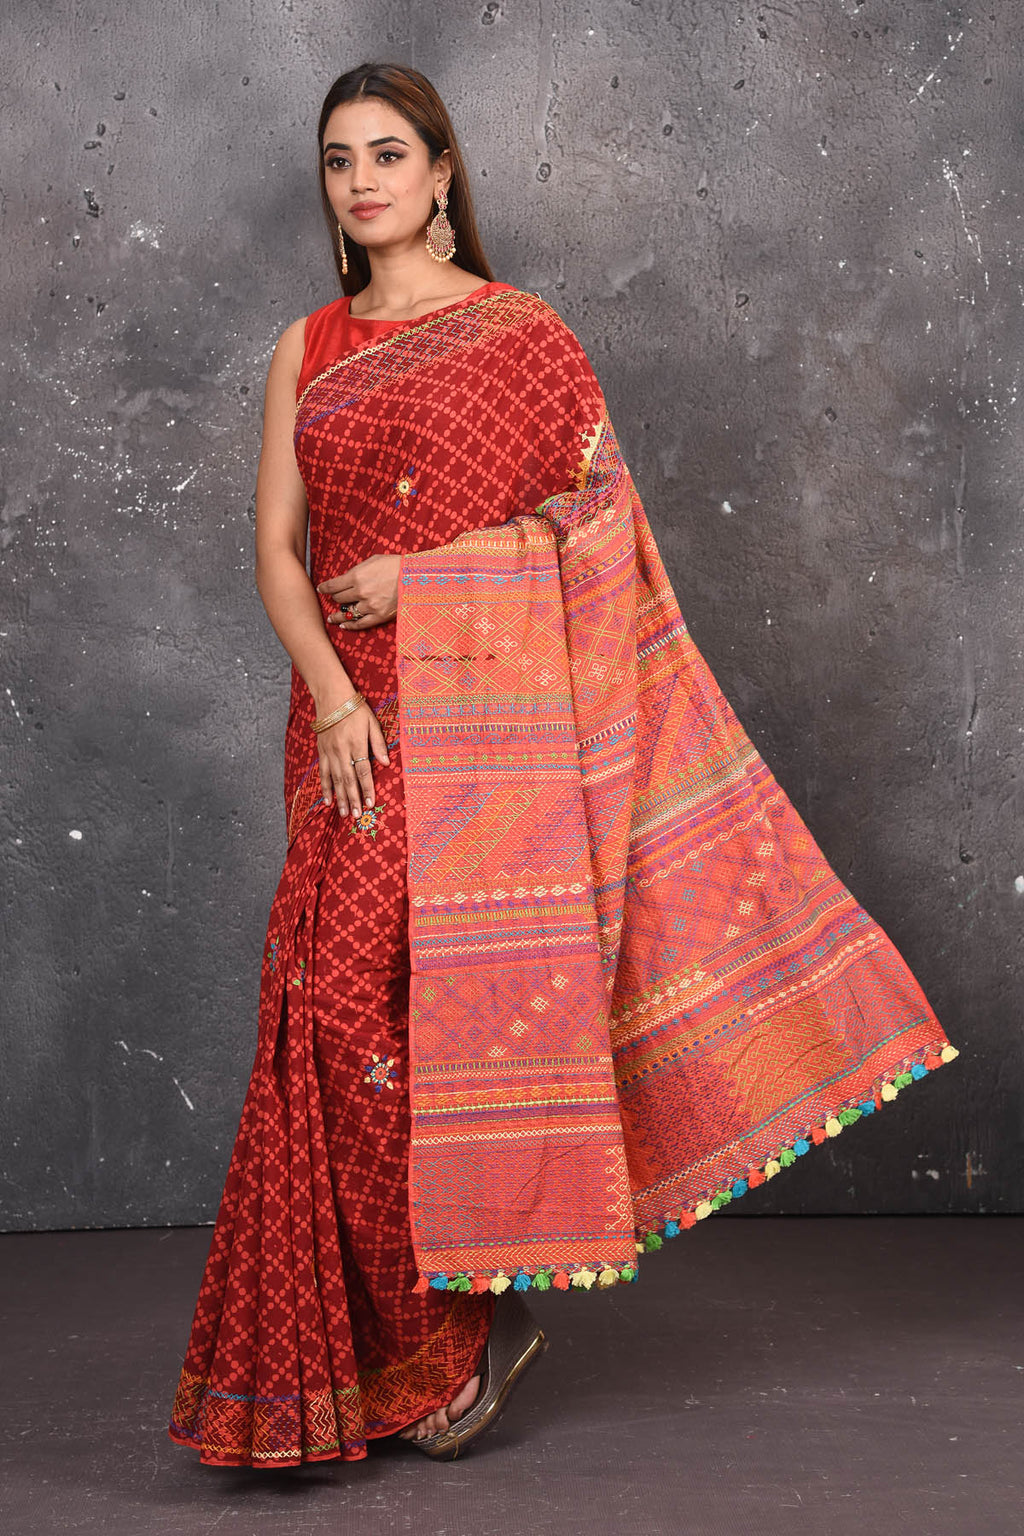 Shop this classy red hand painted madhubani cotton saree online in USA. Perfect to be worn as part of your everyday work wear, with this hand-painted red Madhubani saree, elegance meets traditional. Add this designer Lambani embroidery designer saree with colored tassels to your collection from Pure Elegance Indian Fashion Store in USA.- Full view with open pallu.